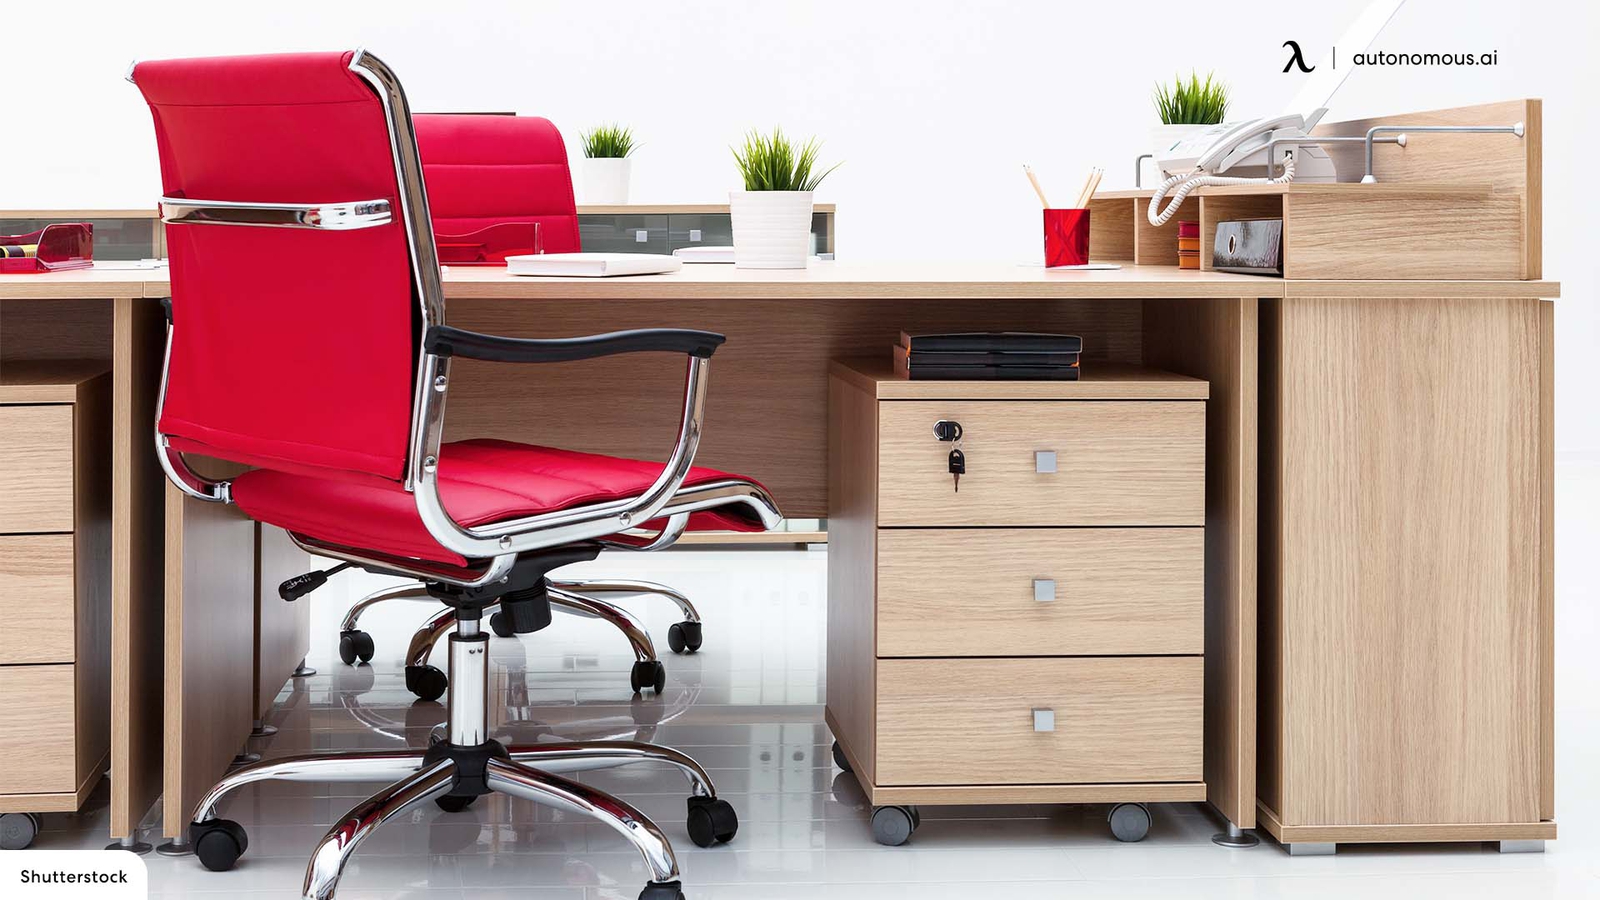 10 Elegant Red Office Chair With Arms Available in Market